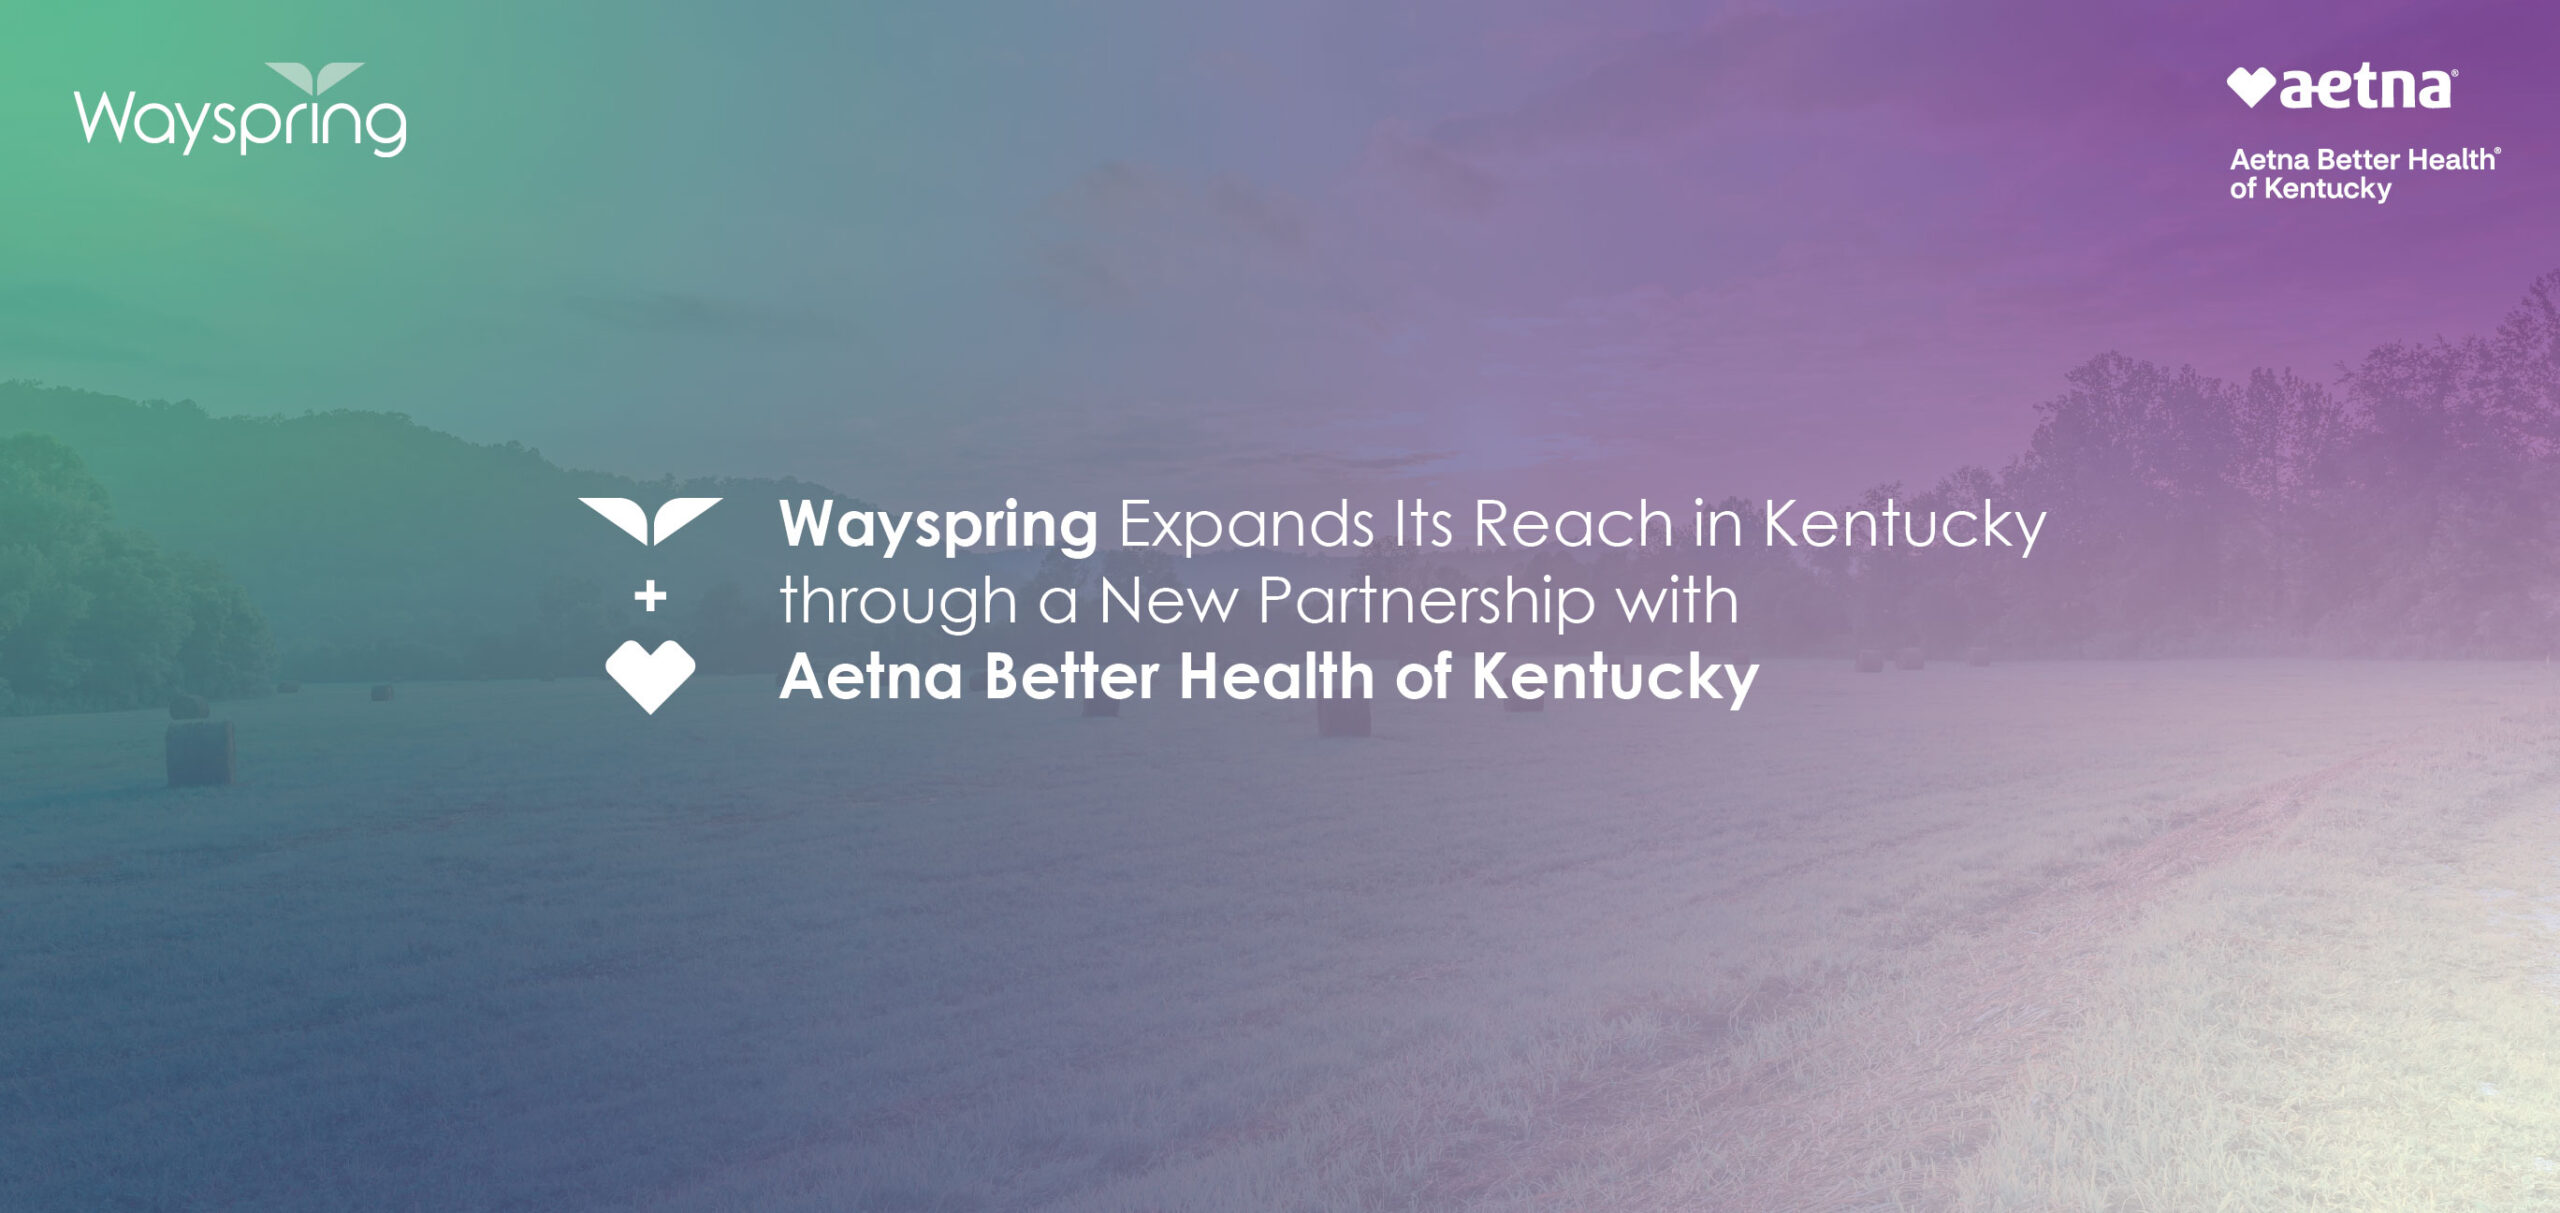 Wayspring Partnership with Aetna Better Health of Kentucky